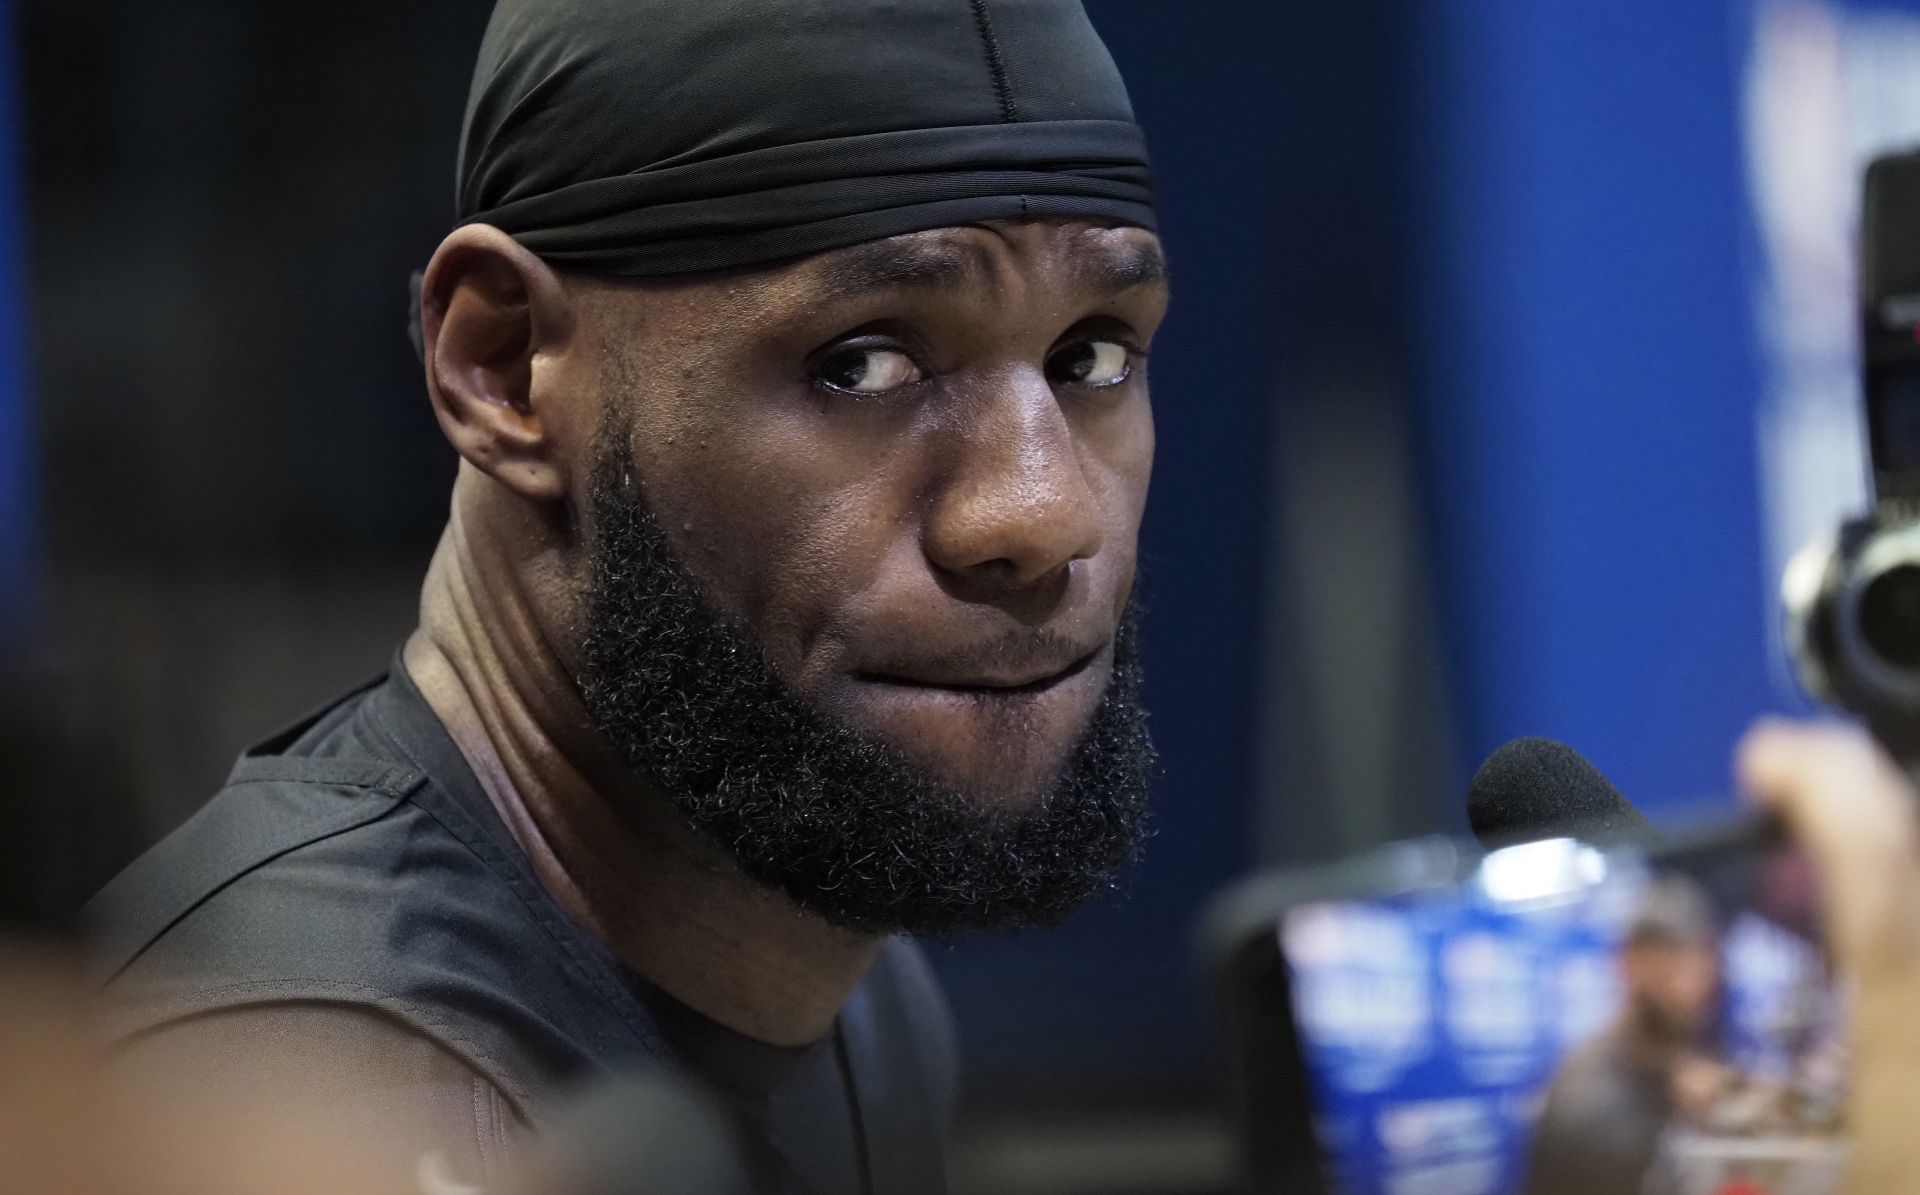 epa07375429 Los Angeles Lakers LeBron James listens to a question at Media Day during the All Star Weekend at the Bojangles' Coliseum in Charlotte, North Carolina, USA, 16 February 2019.  EPA/JOHN G. MABANGLO SHUTTERSTOCK OUT SHUTTERSTOCK OUT